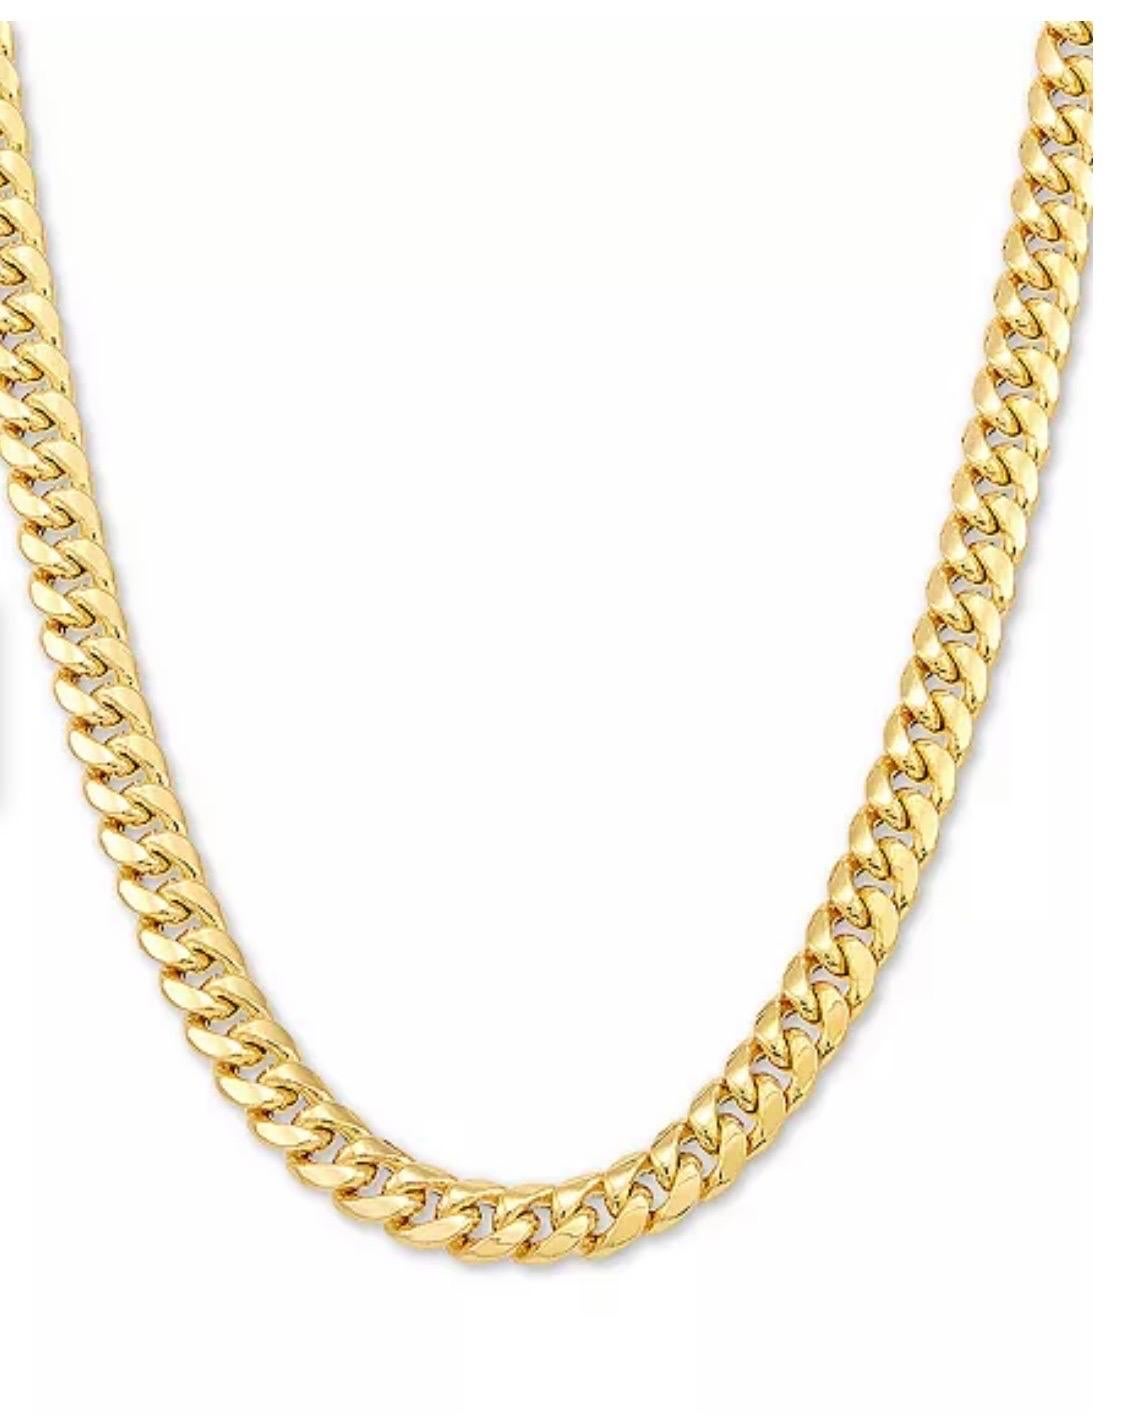 Vintage 18 Karat Yellow Gold 150 Gm Cuban link Chain Unisex In Excellent Condition For Sale In New York, NY